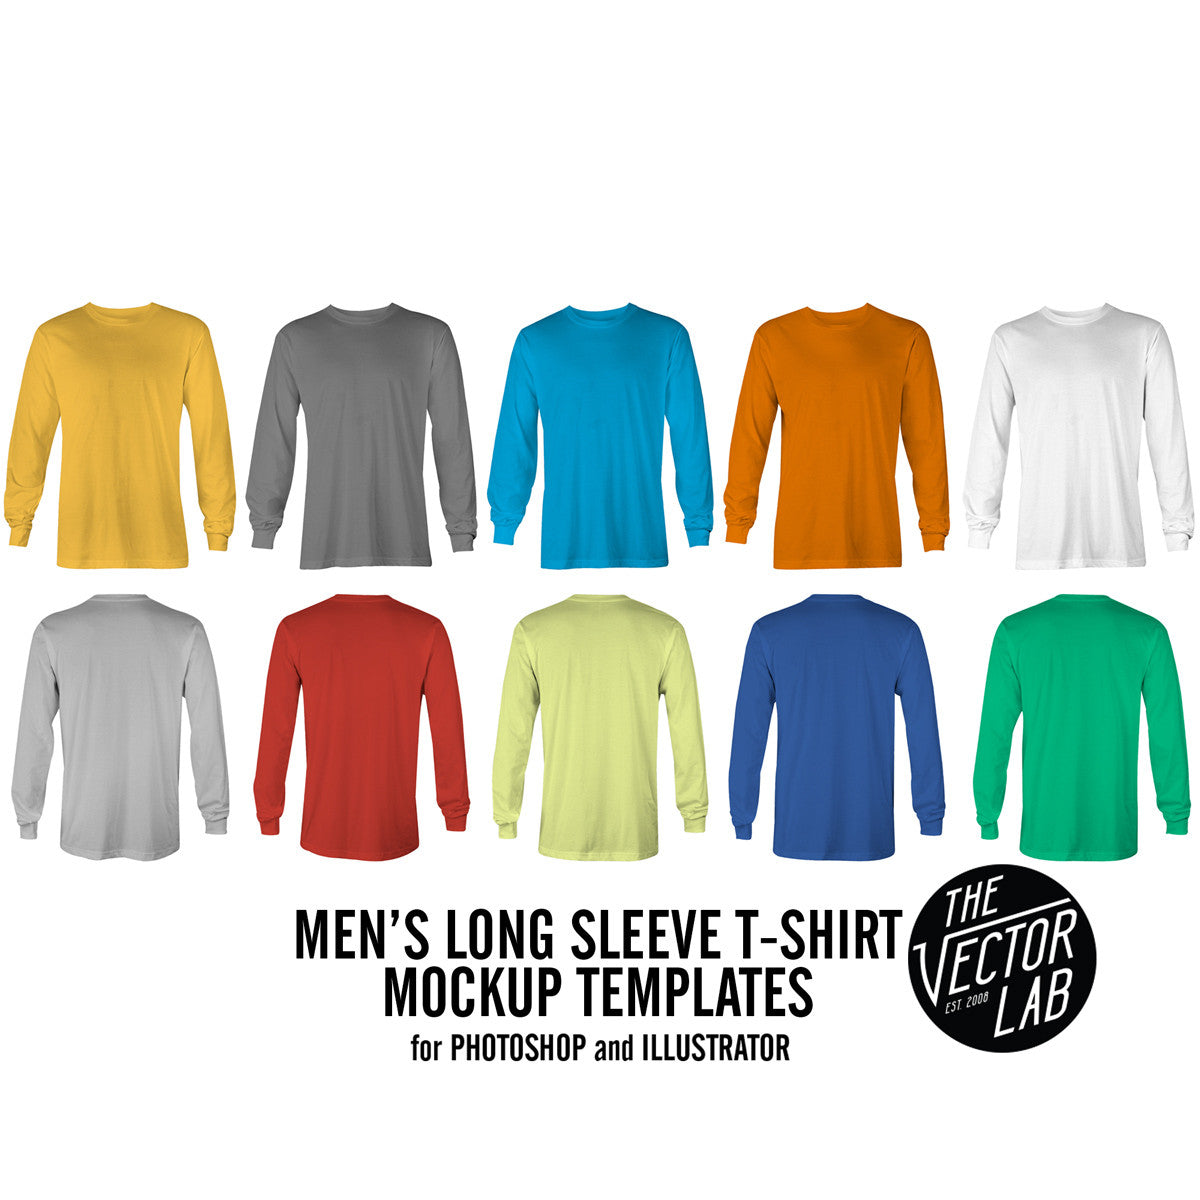 Download Men S Long Sleeve T Shirt Mockup Templates Thevectorlab Yellowimages Mockups